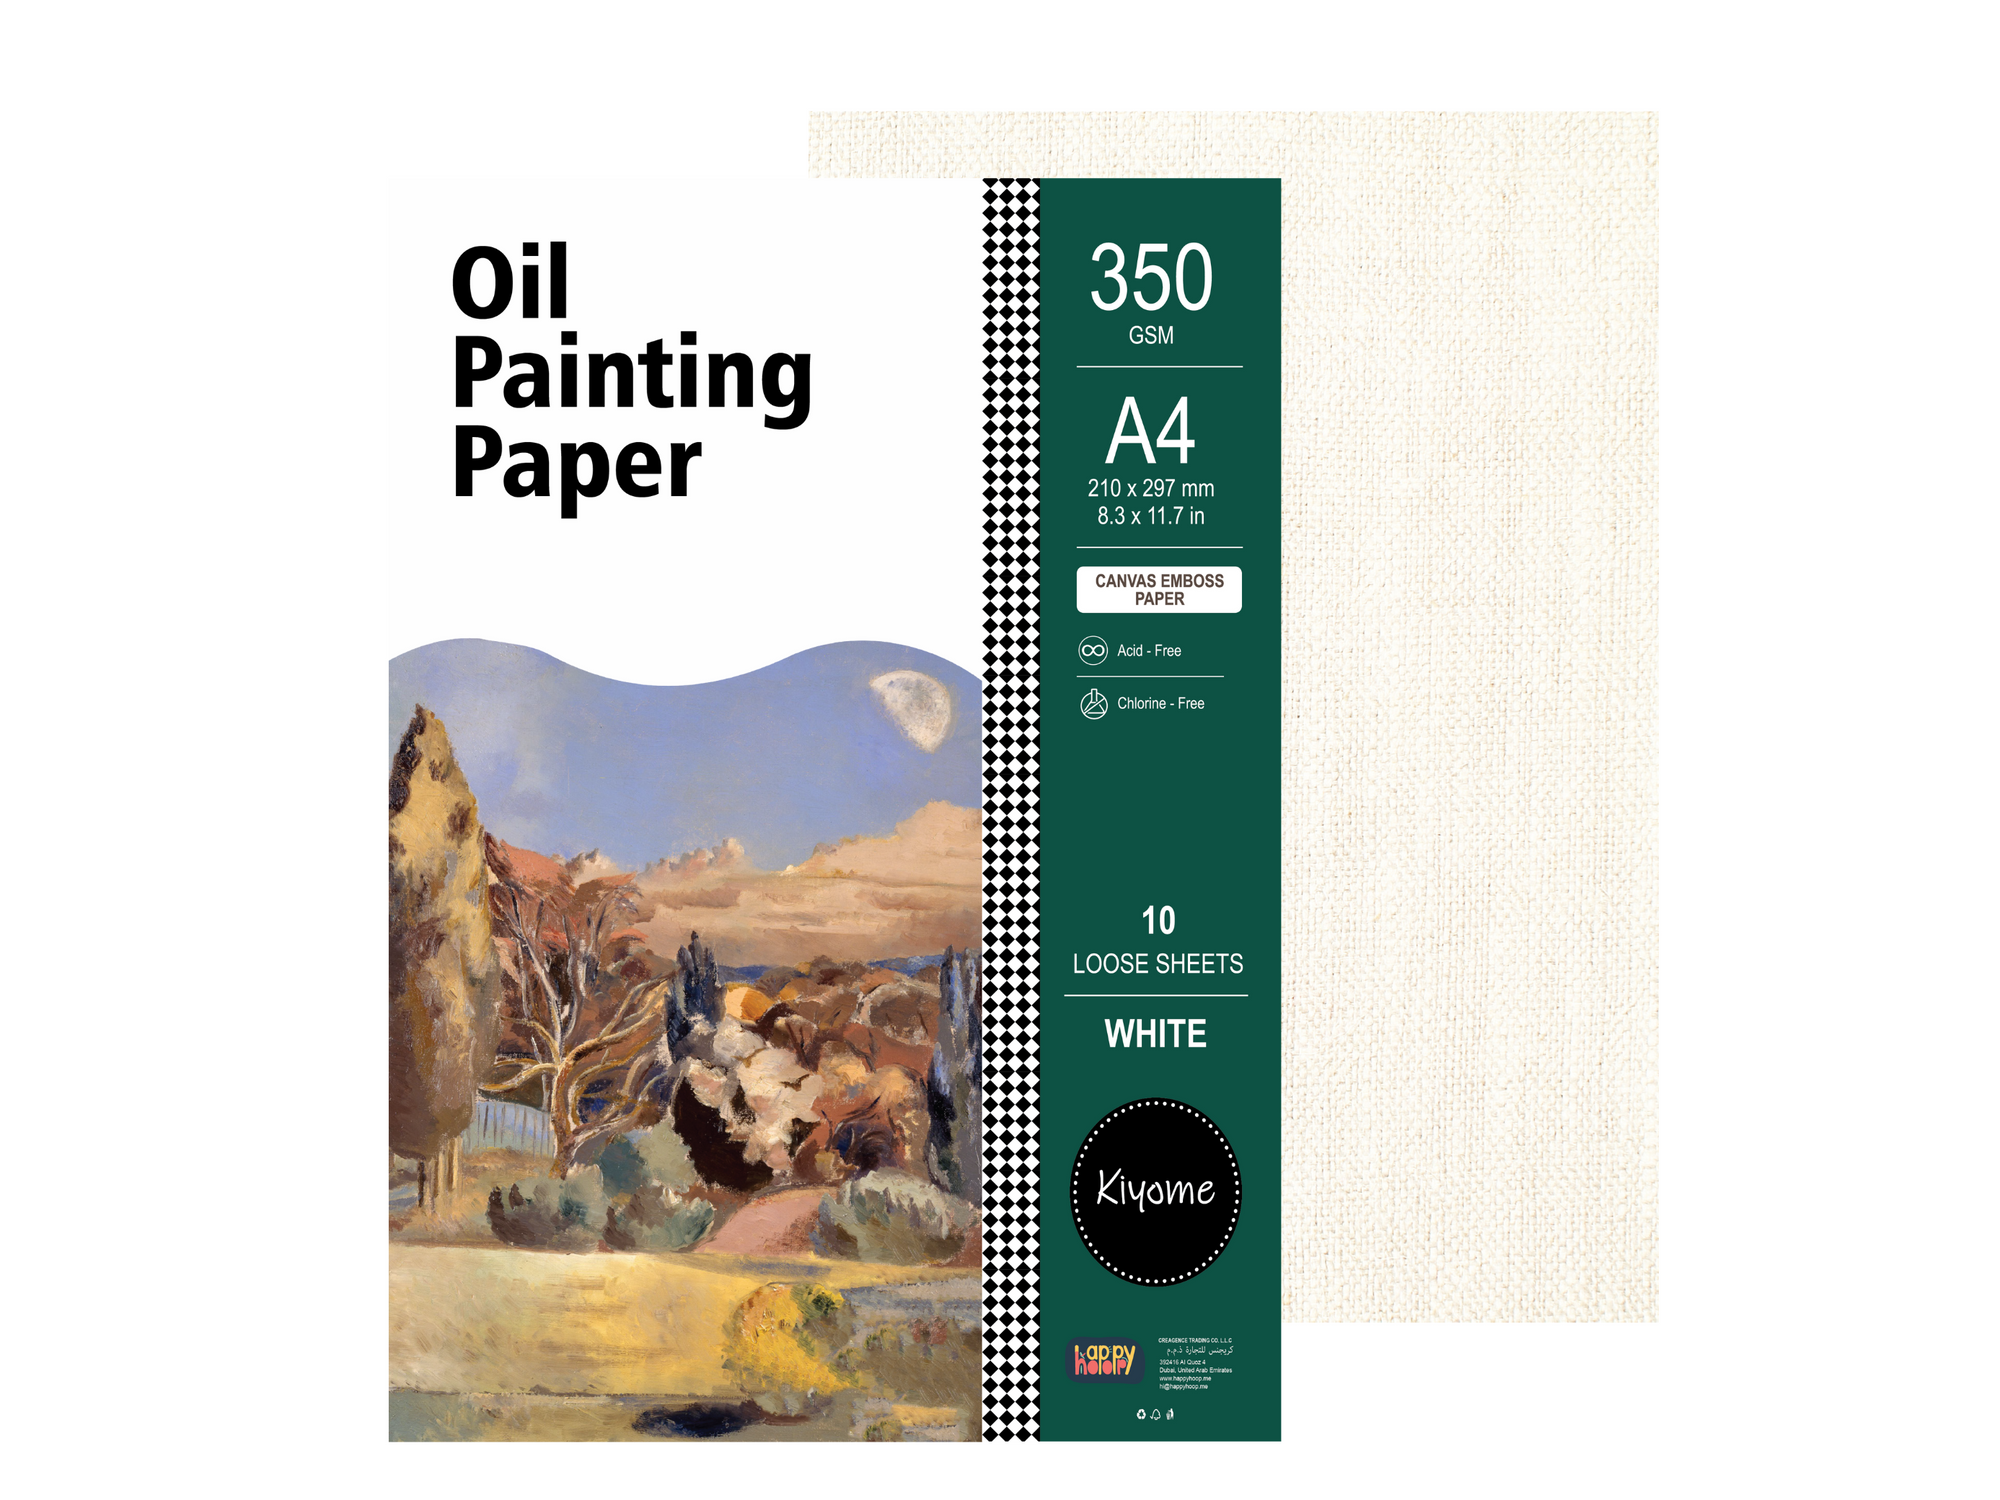 Kiyome Oil Painting Sheets | 350 GSM | A4 | 10 Sheets